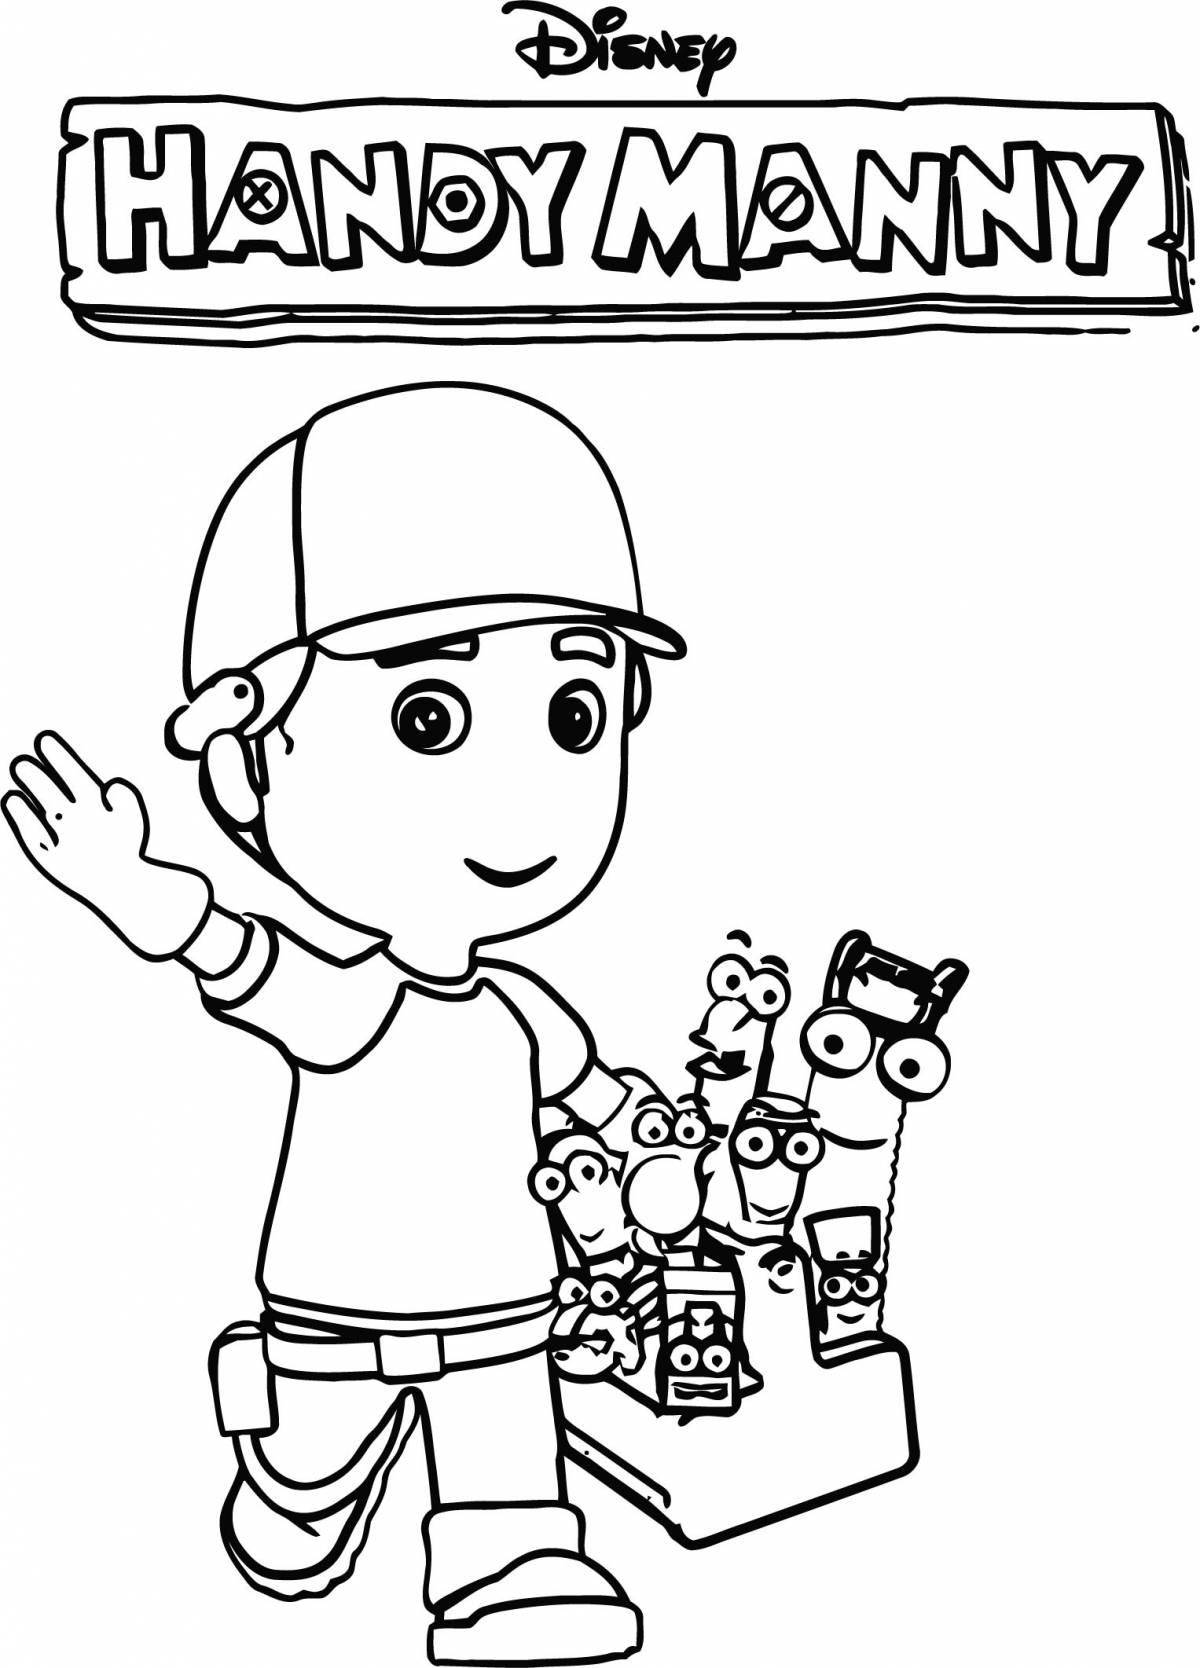 Exciting cog coloring page